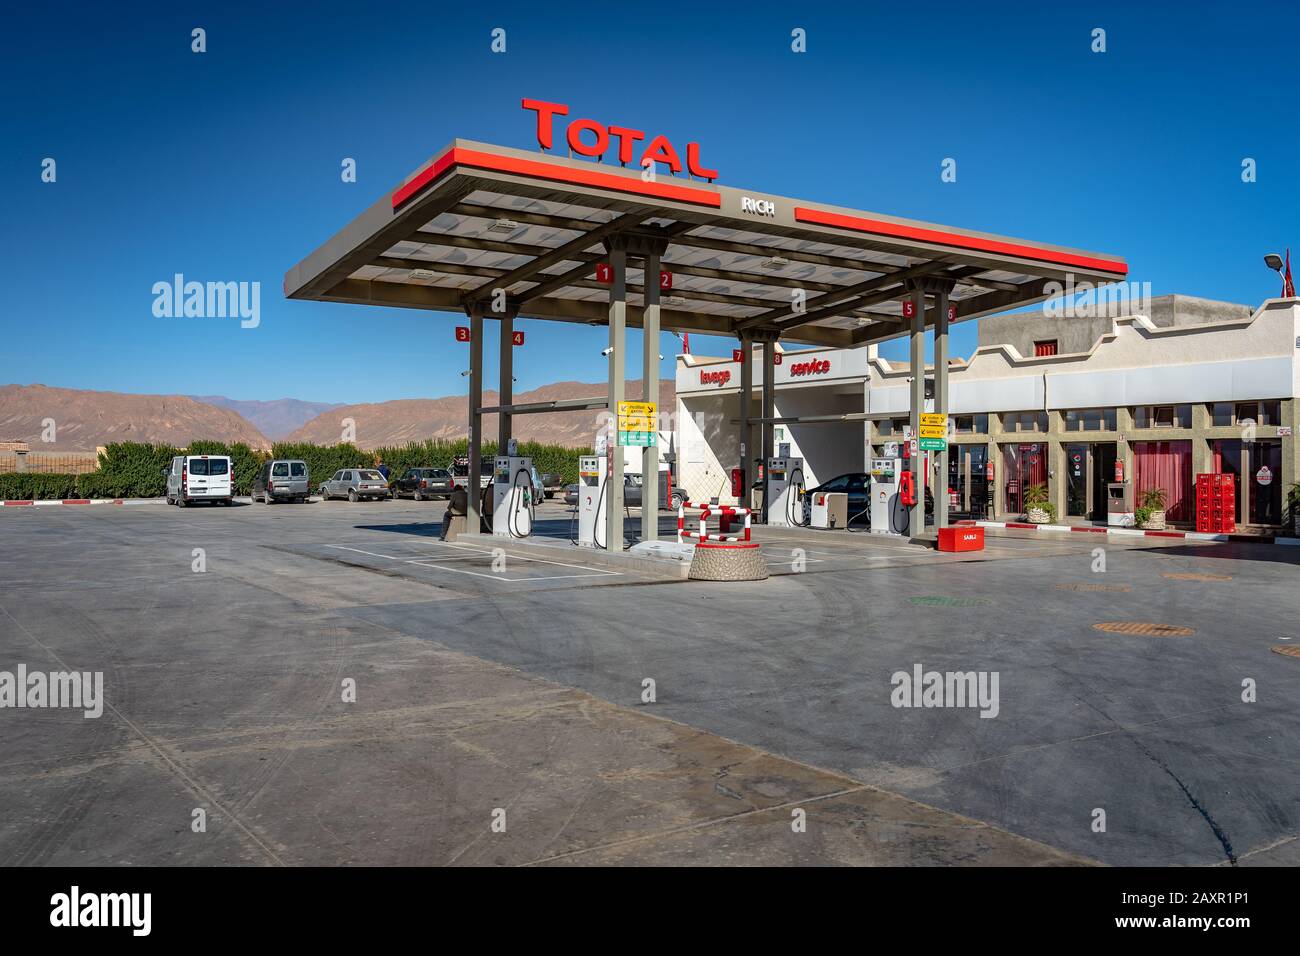 Er-Rich, Morocco - Total petrol station along the highway Stock Photo